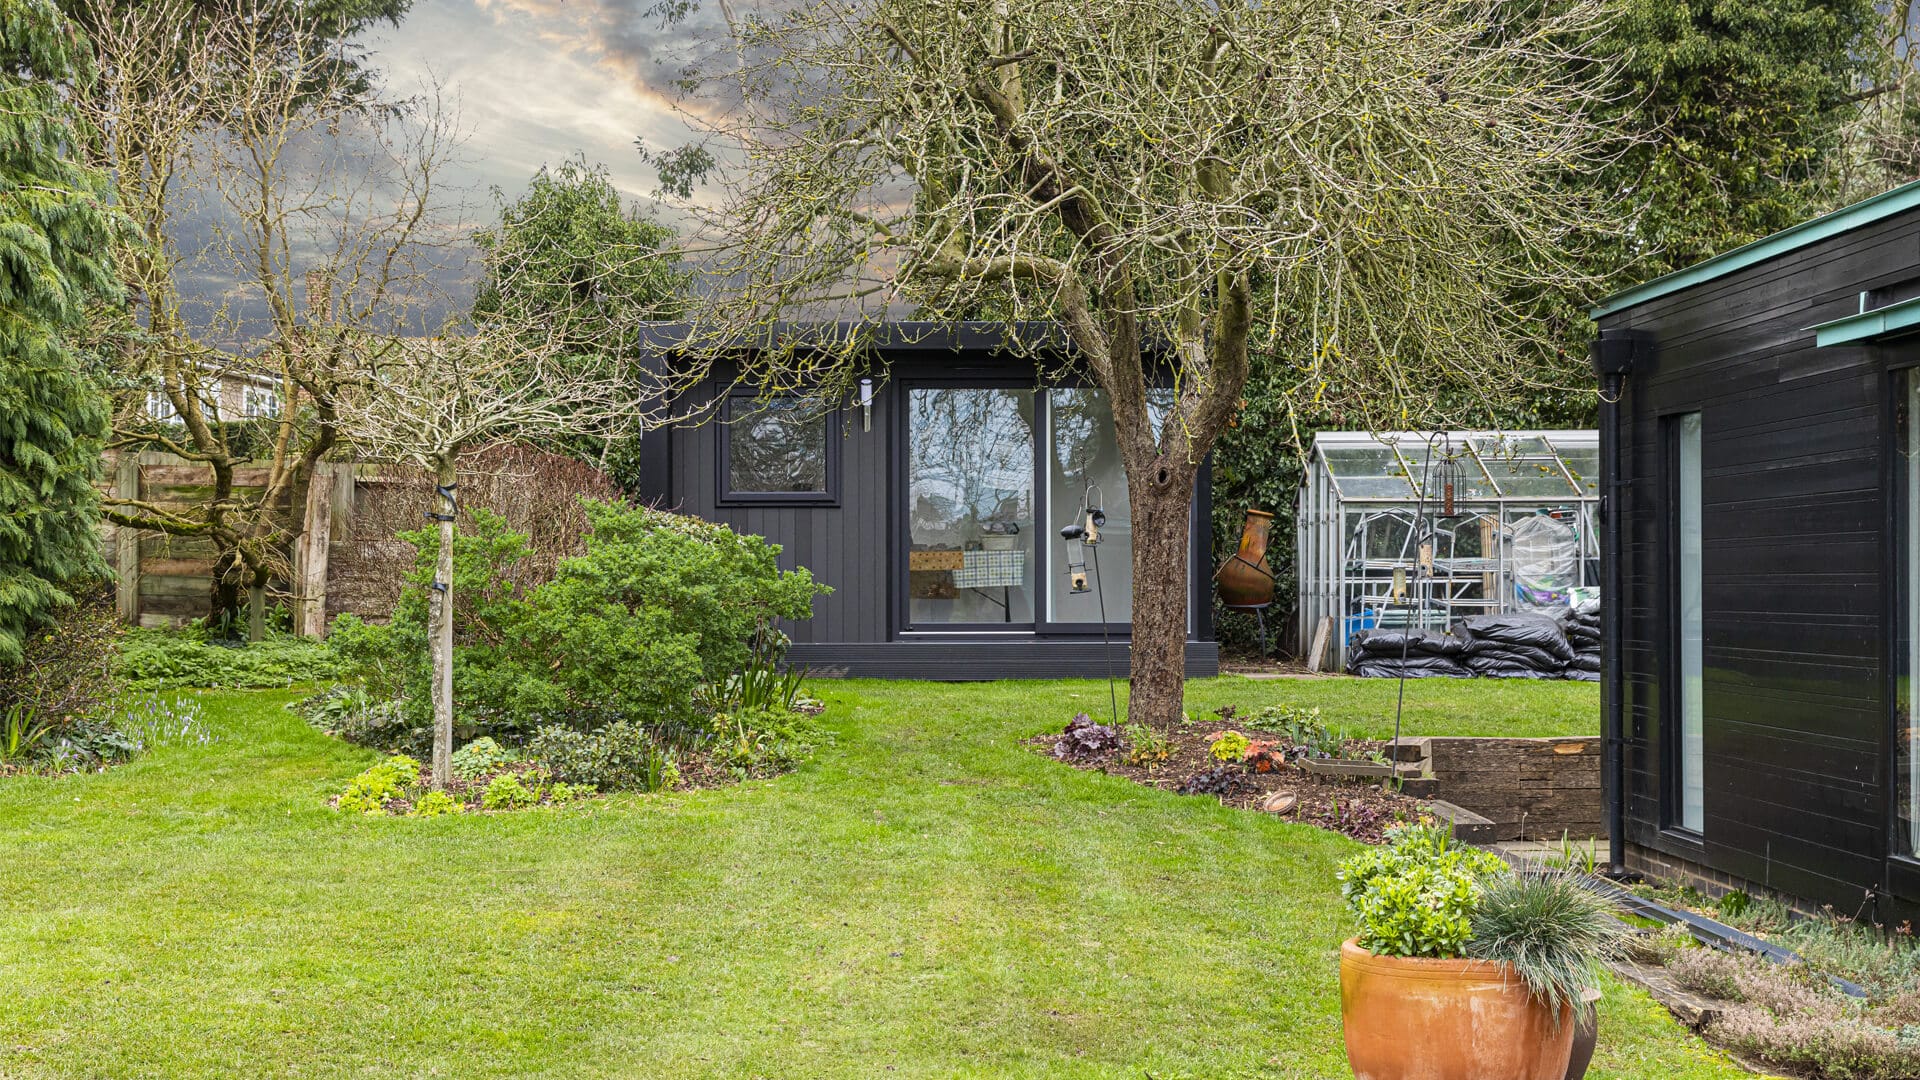 Luxury garden office with a graphite-effect exterior hidden behind some trees